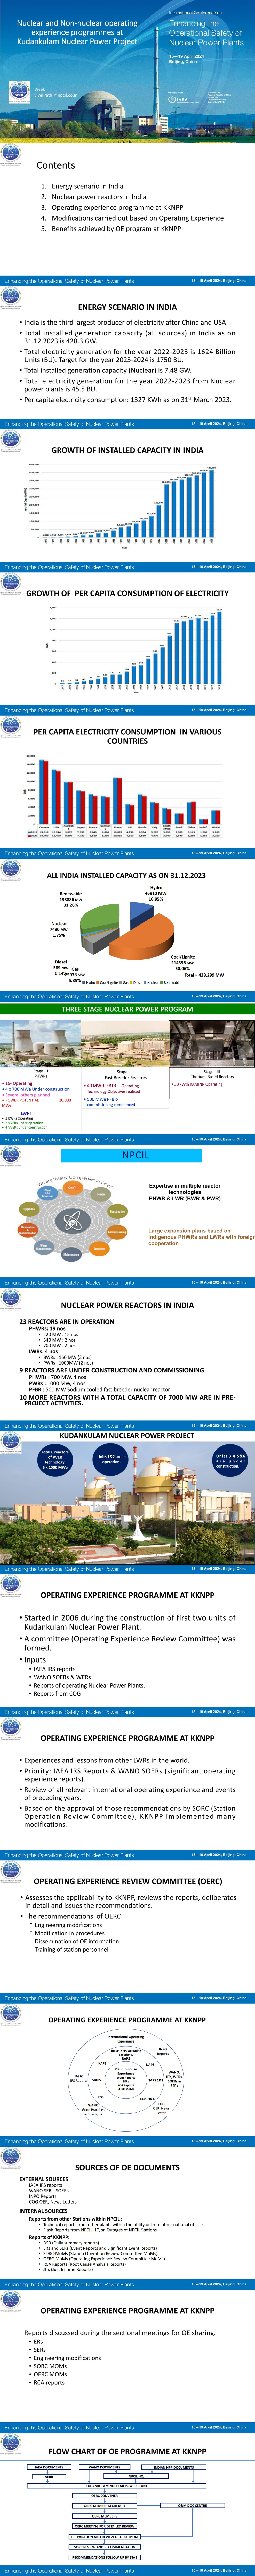 18_01_V Vivek_Nuclear and Non-Nuclear Operating Experience Programmes_00.jpg